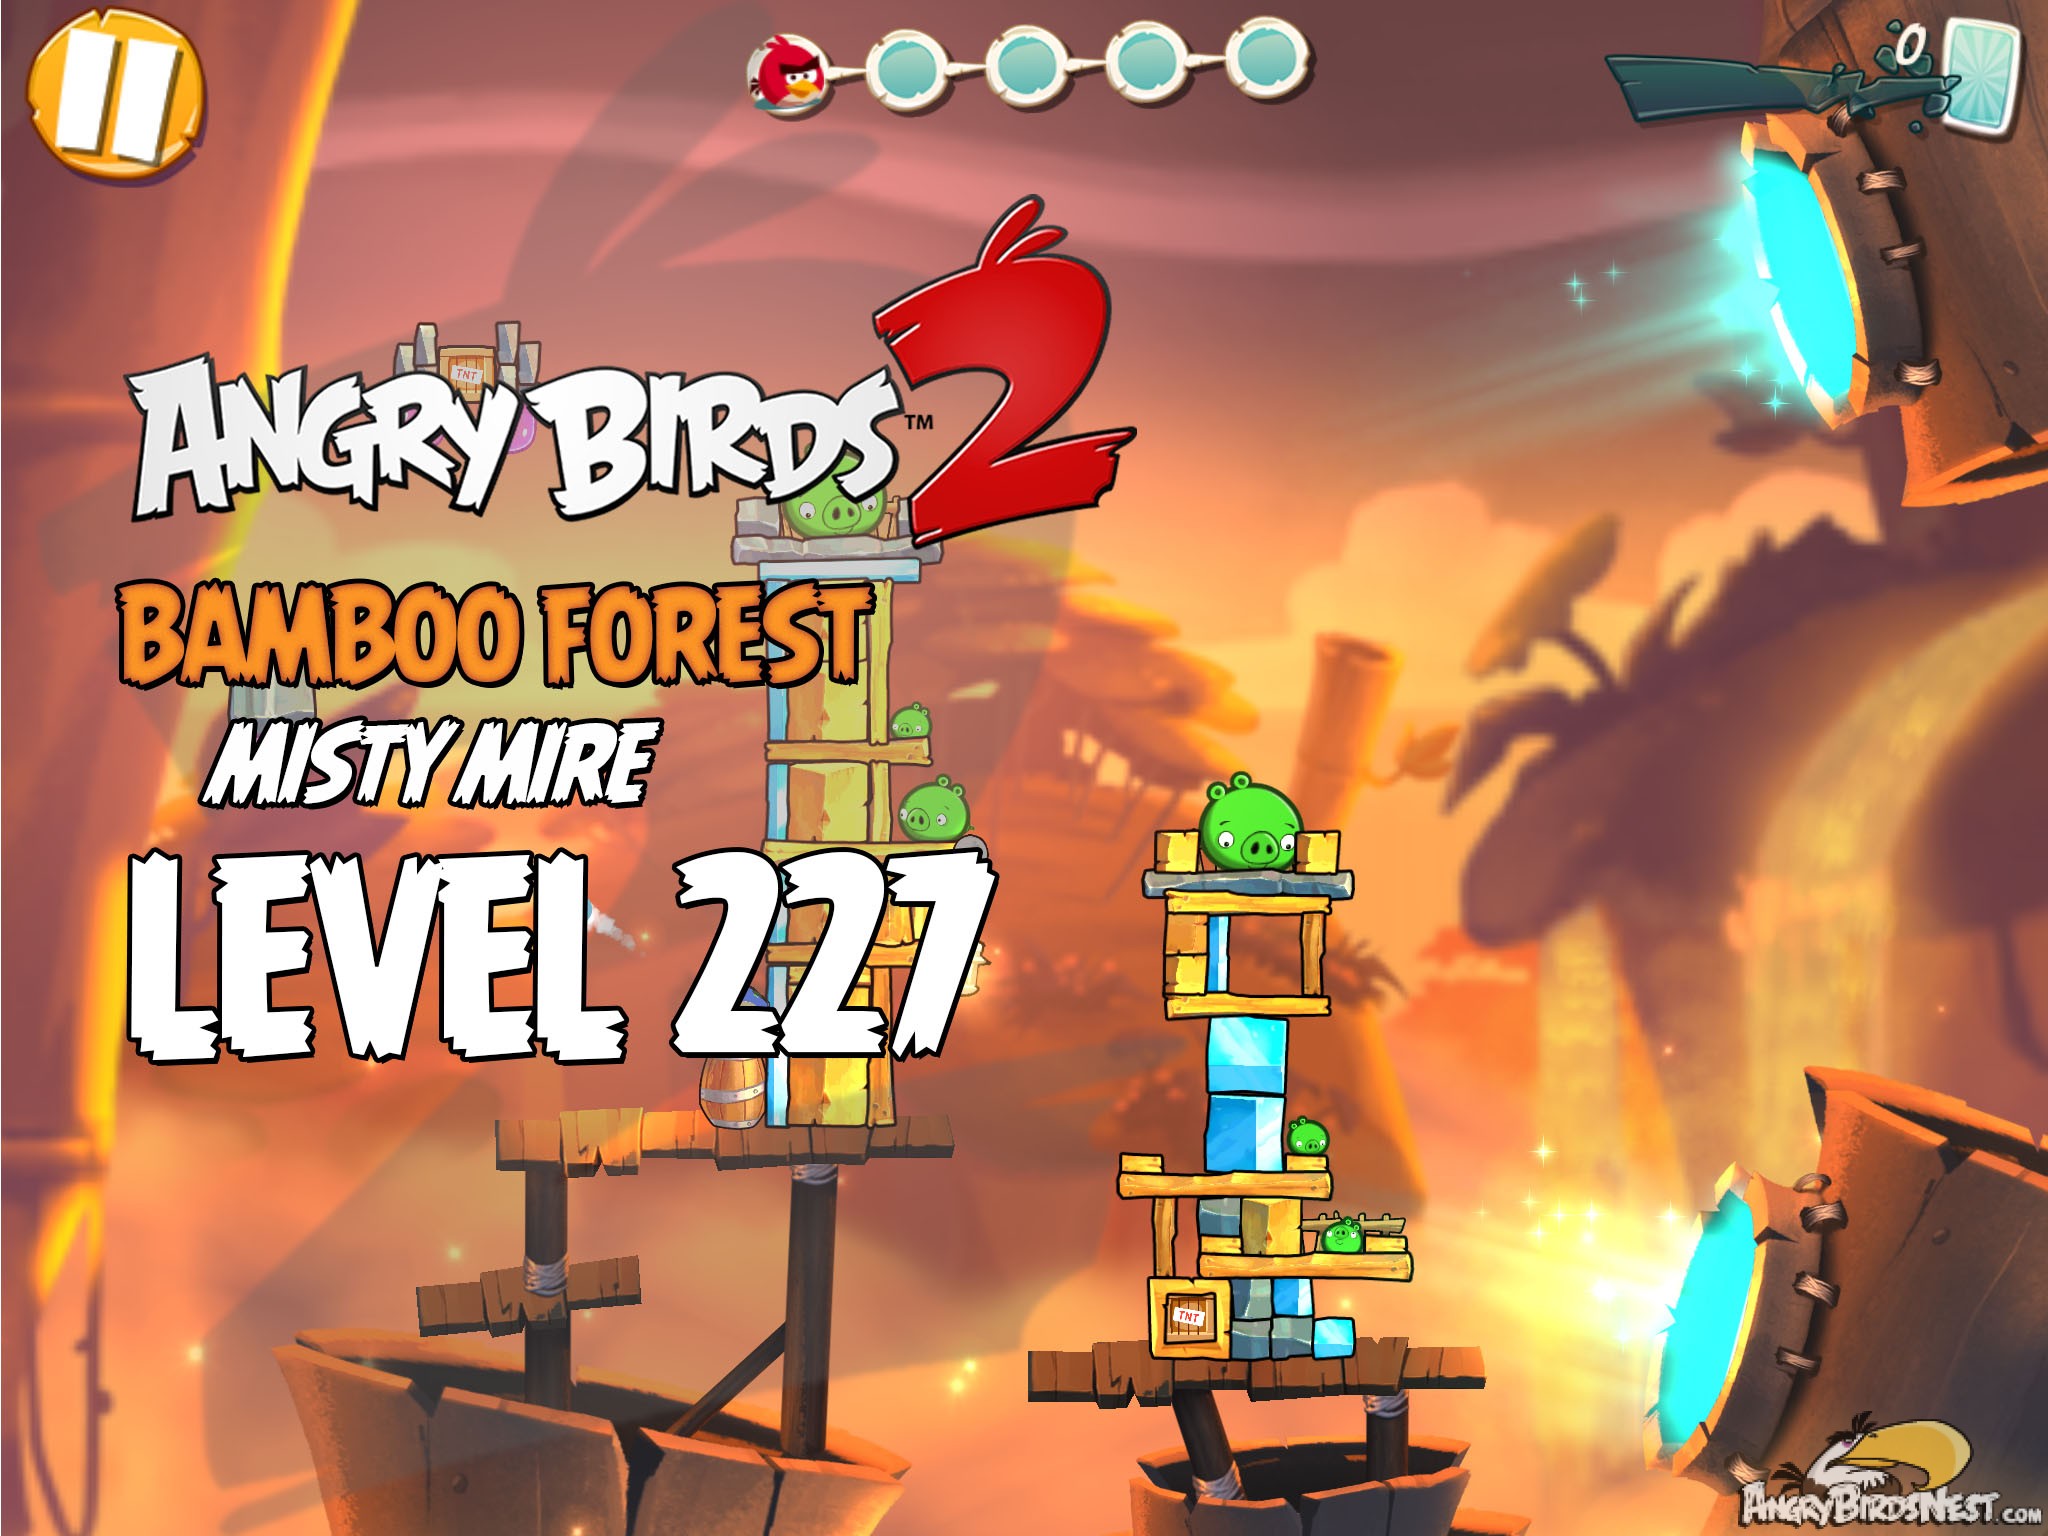 Angry Birds 2 Bamboo Forest Misty Mire Level 227